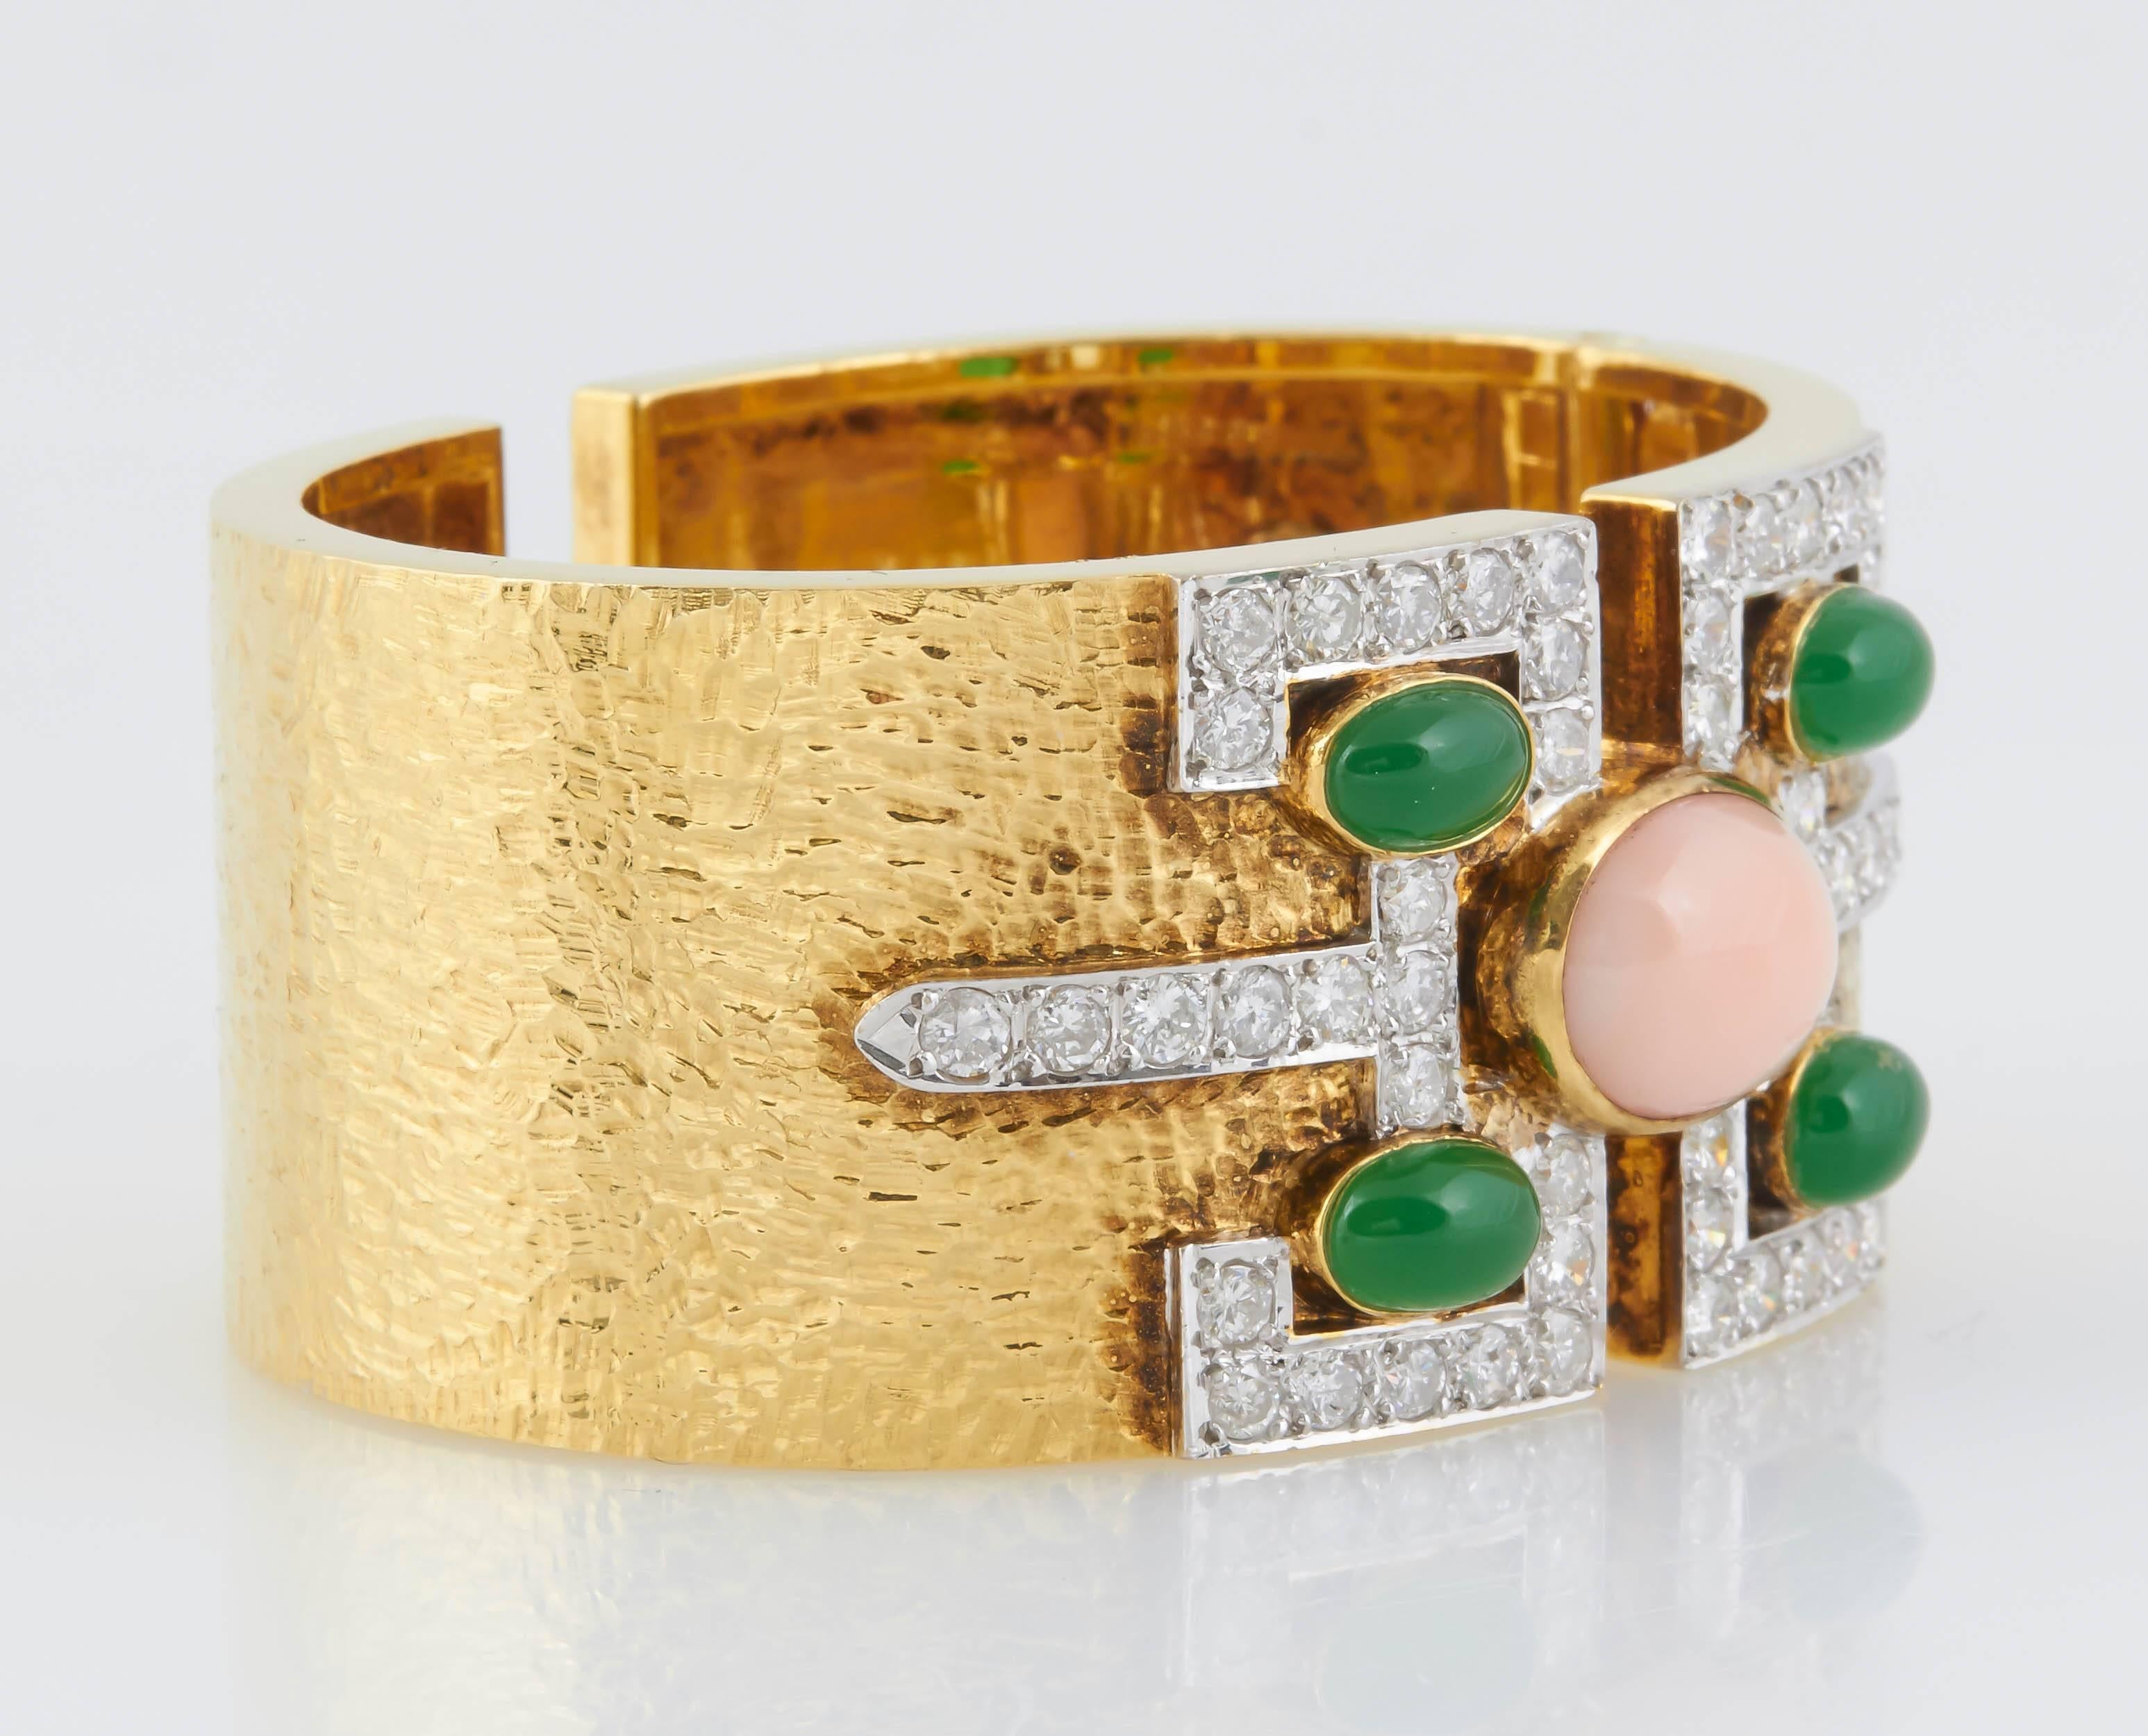 Stylish 18K yellow gold cuff bracelet, featuring a Coral at the center with 4 green onyx stones at each corner. 48 dazzling round cut diamonds (6.50 cts) accentuate the colored stones.  